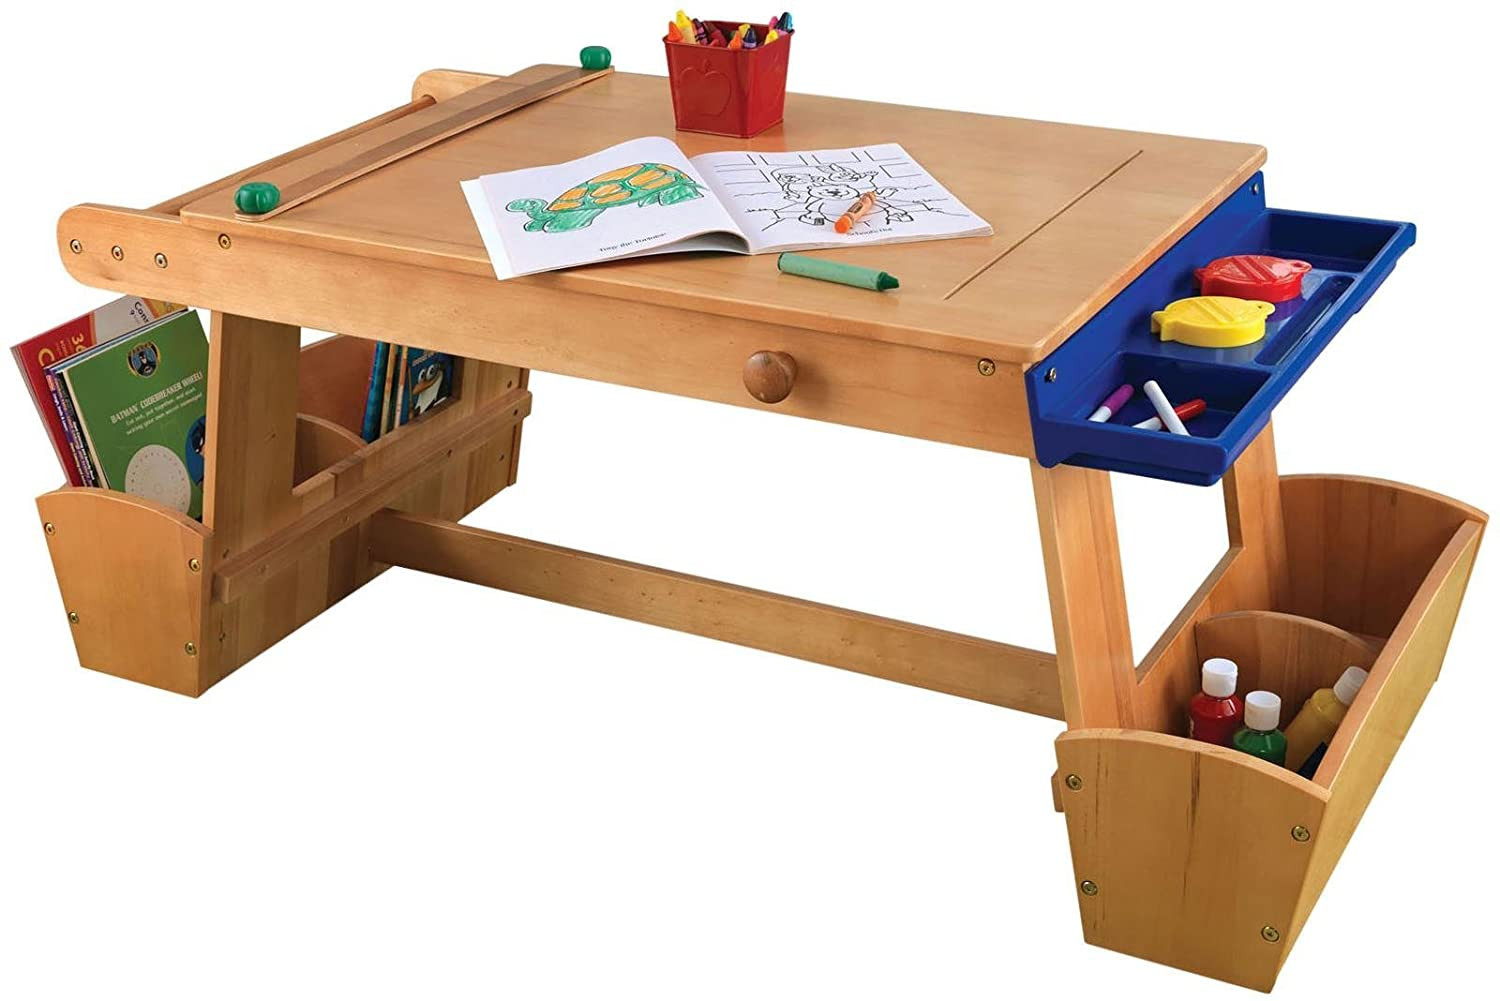 Kids Art Desk With Storage
 Top 12 best art table for kids Review in 2020